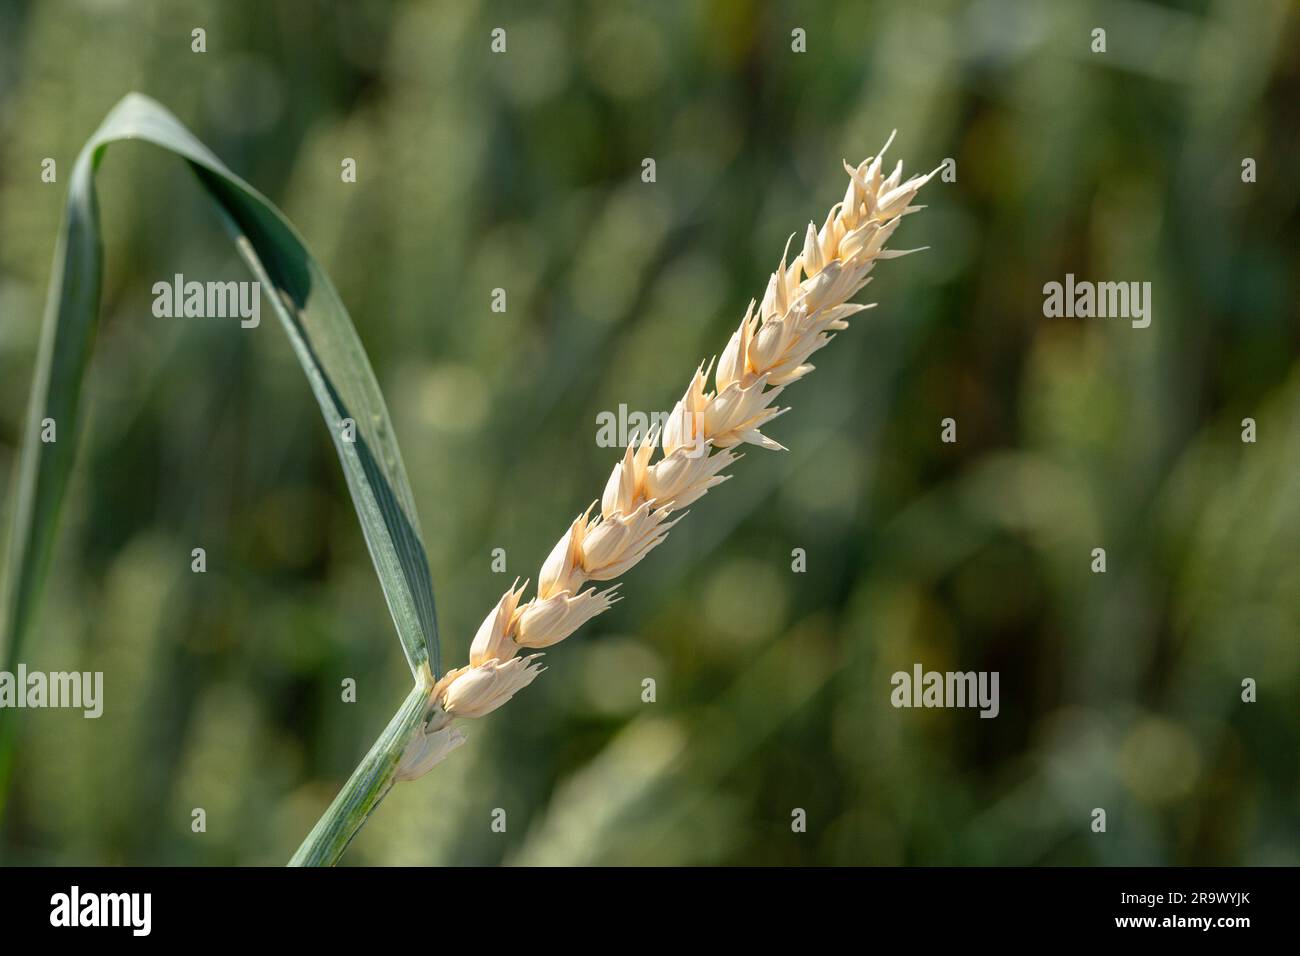 Signs of root rot disease on wheat Stock Photo